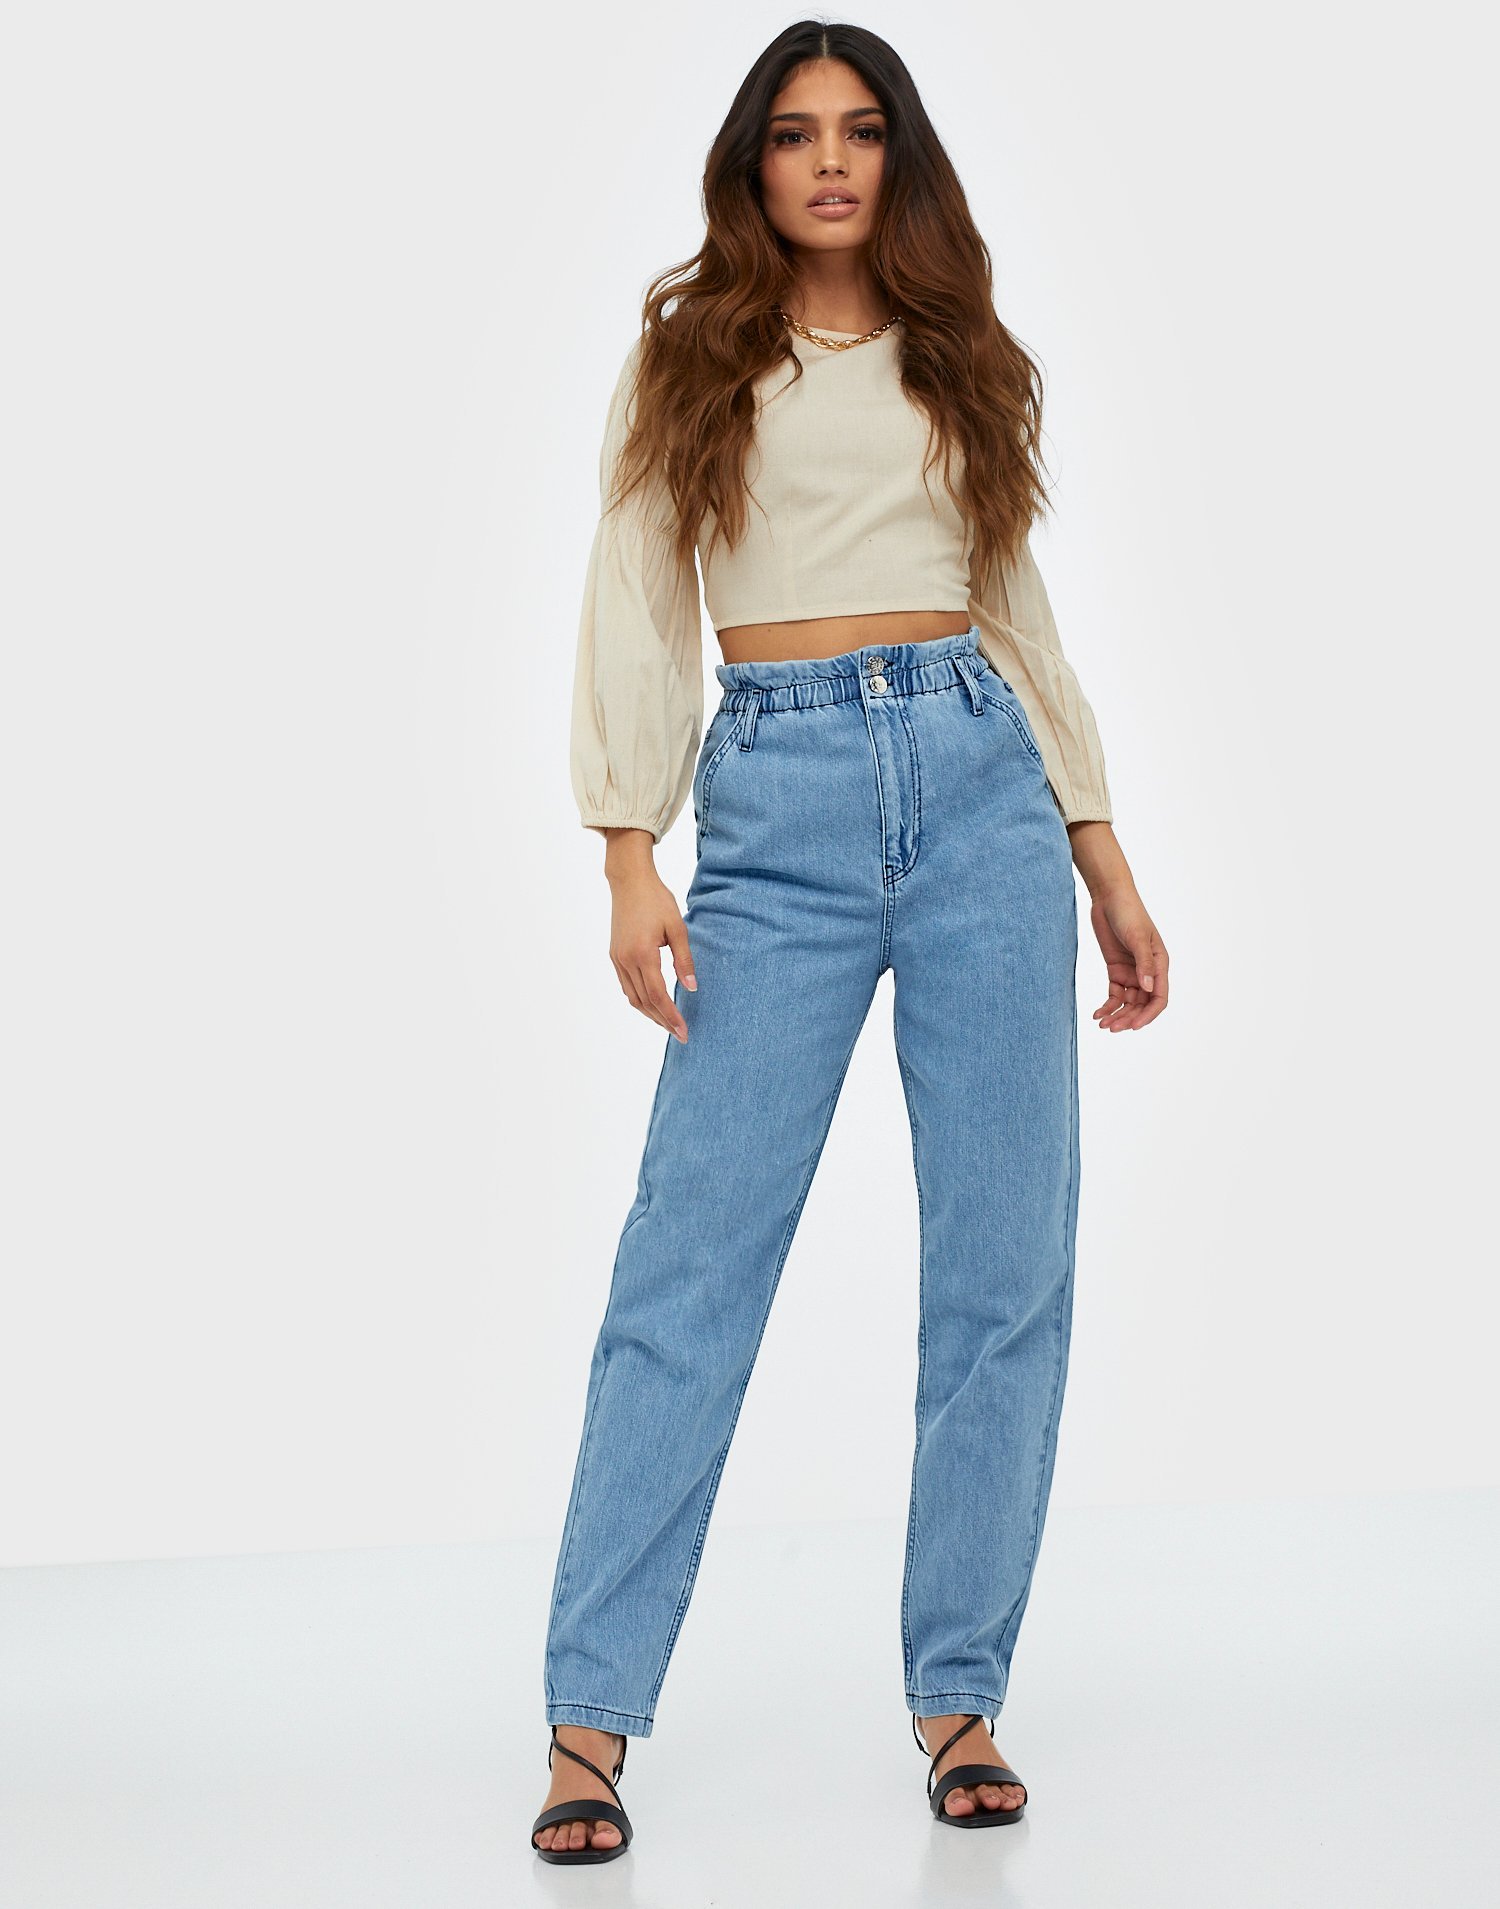 loose jeans